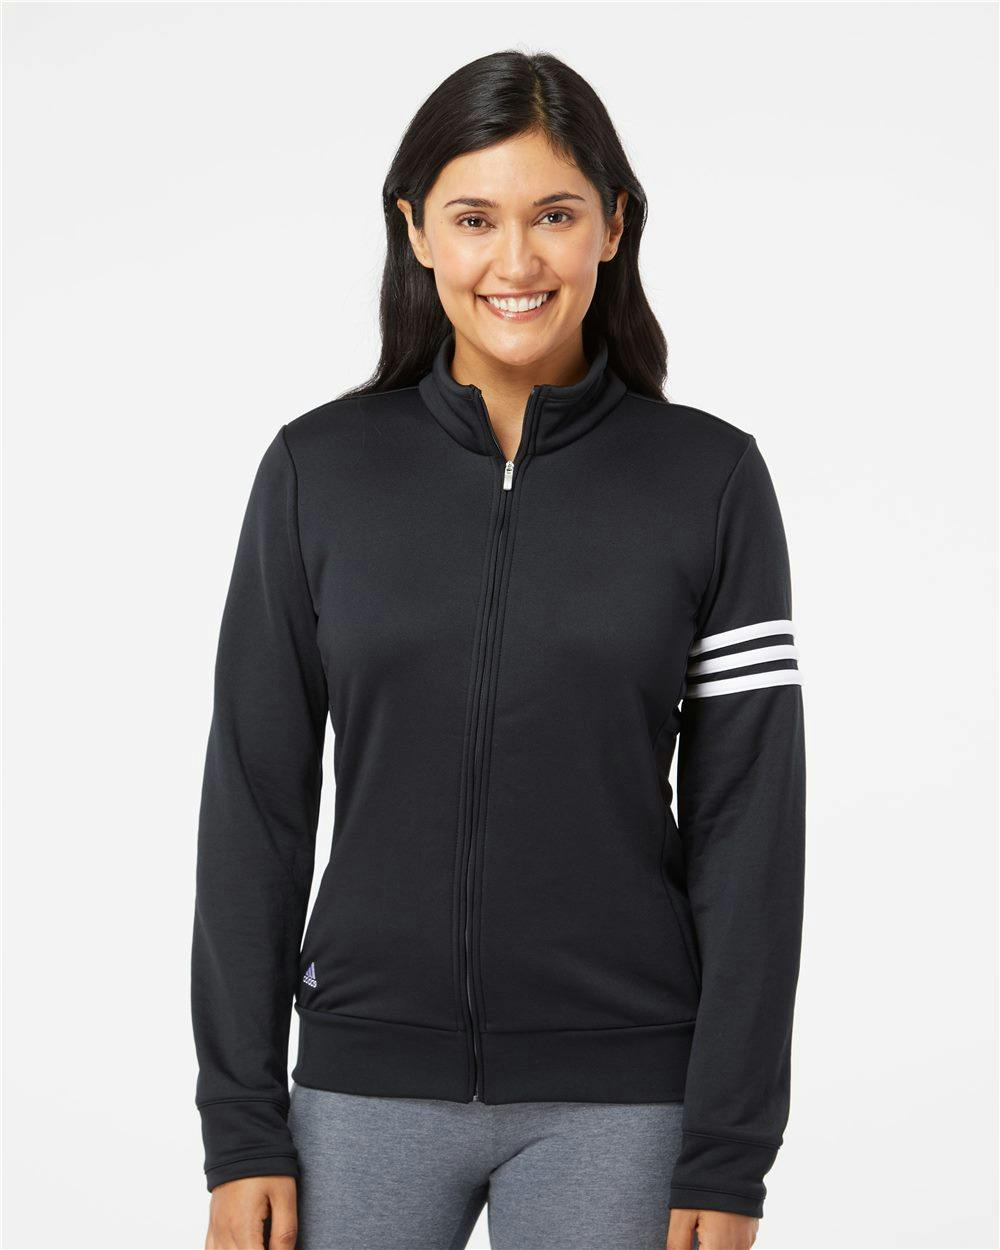 Image for Women's 3-Stripes French Terry Full-Zip Jacket - A191